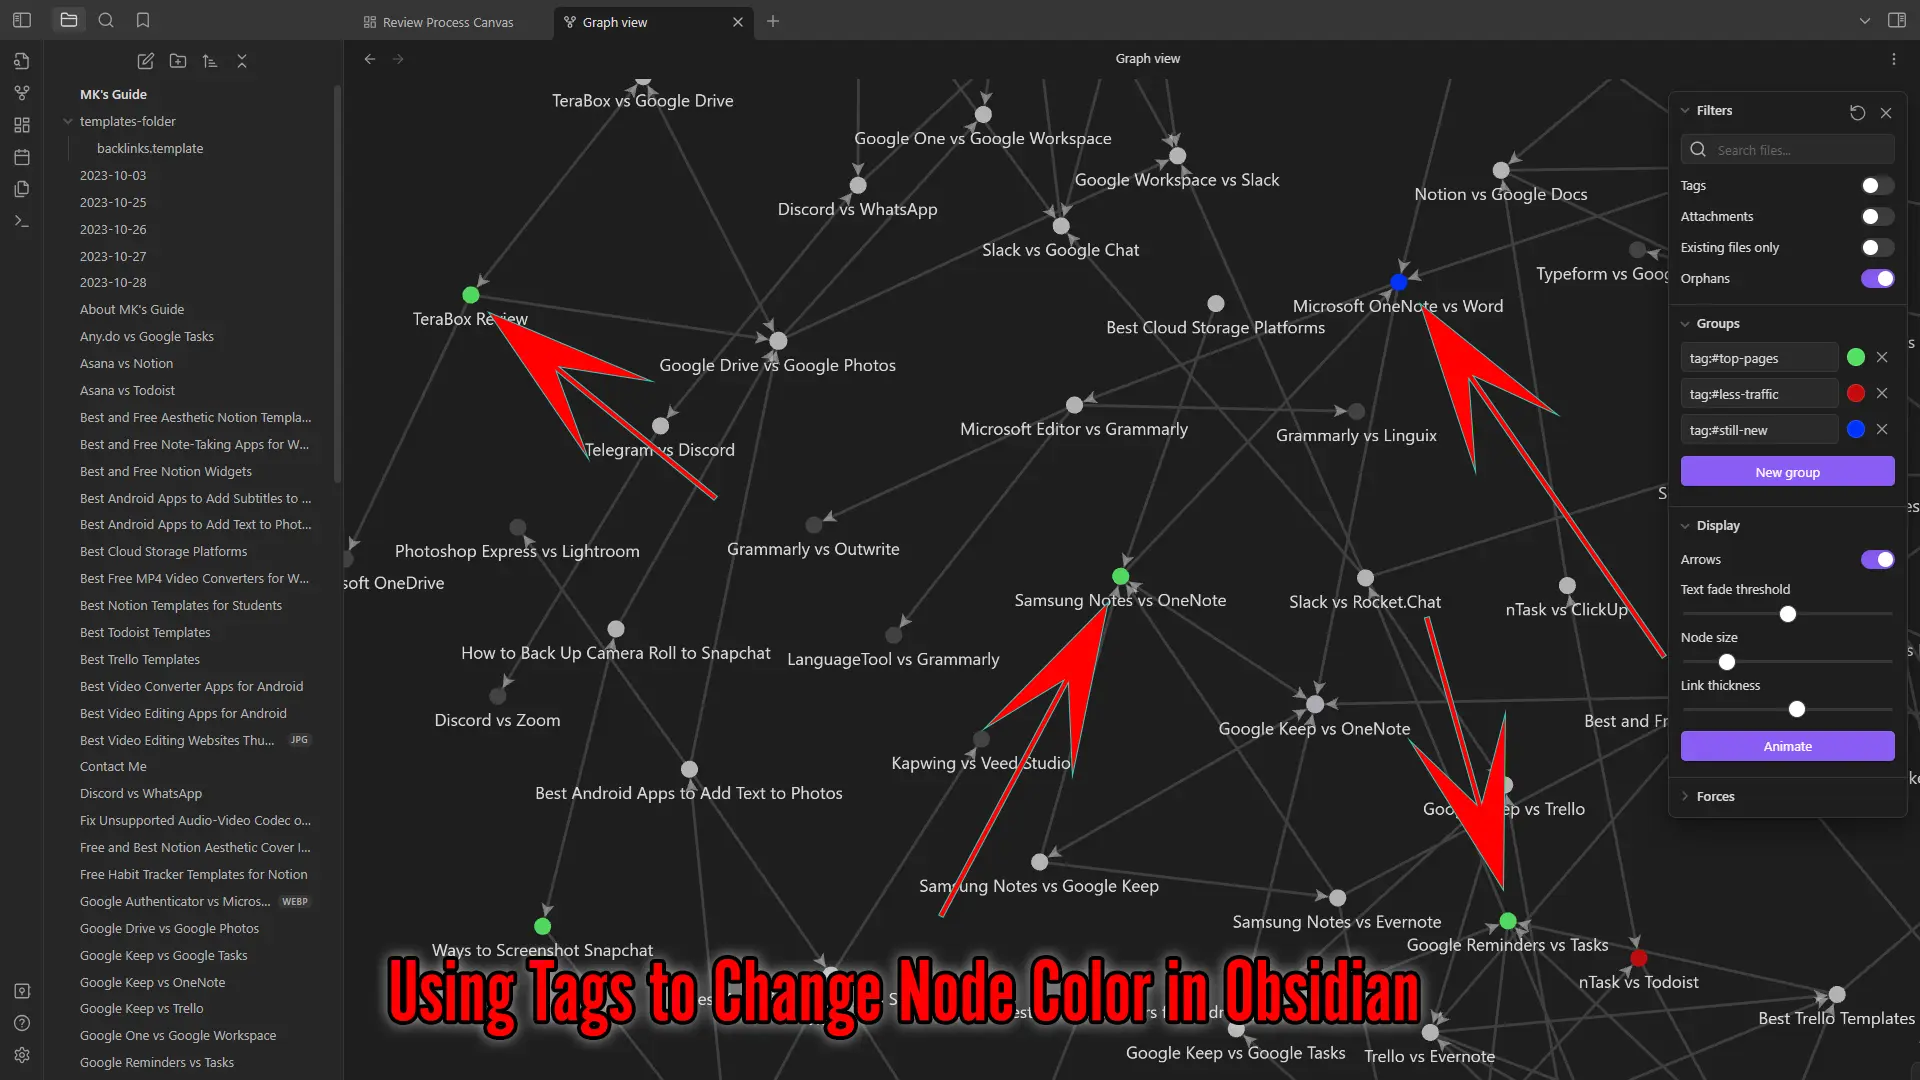 Using Tags to Change Node Color in Obsidian